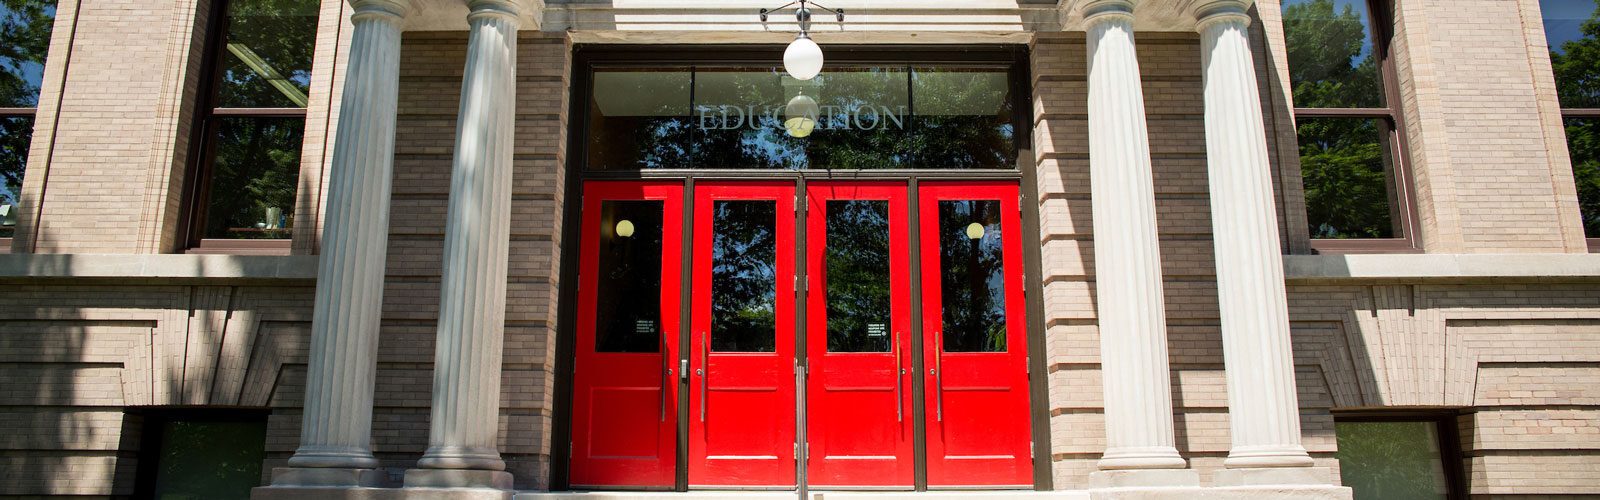 The red doors of the education building